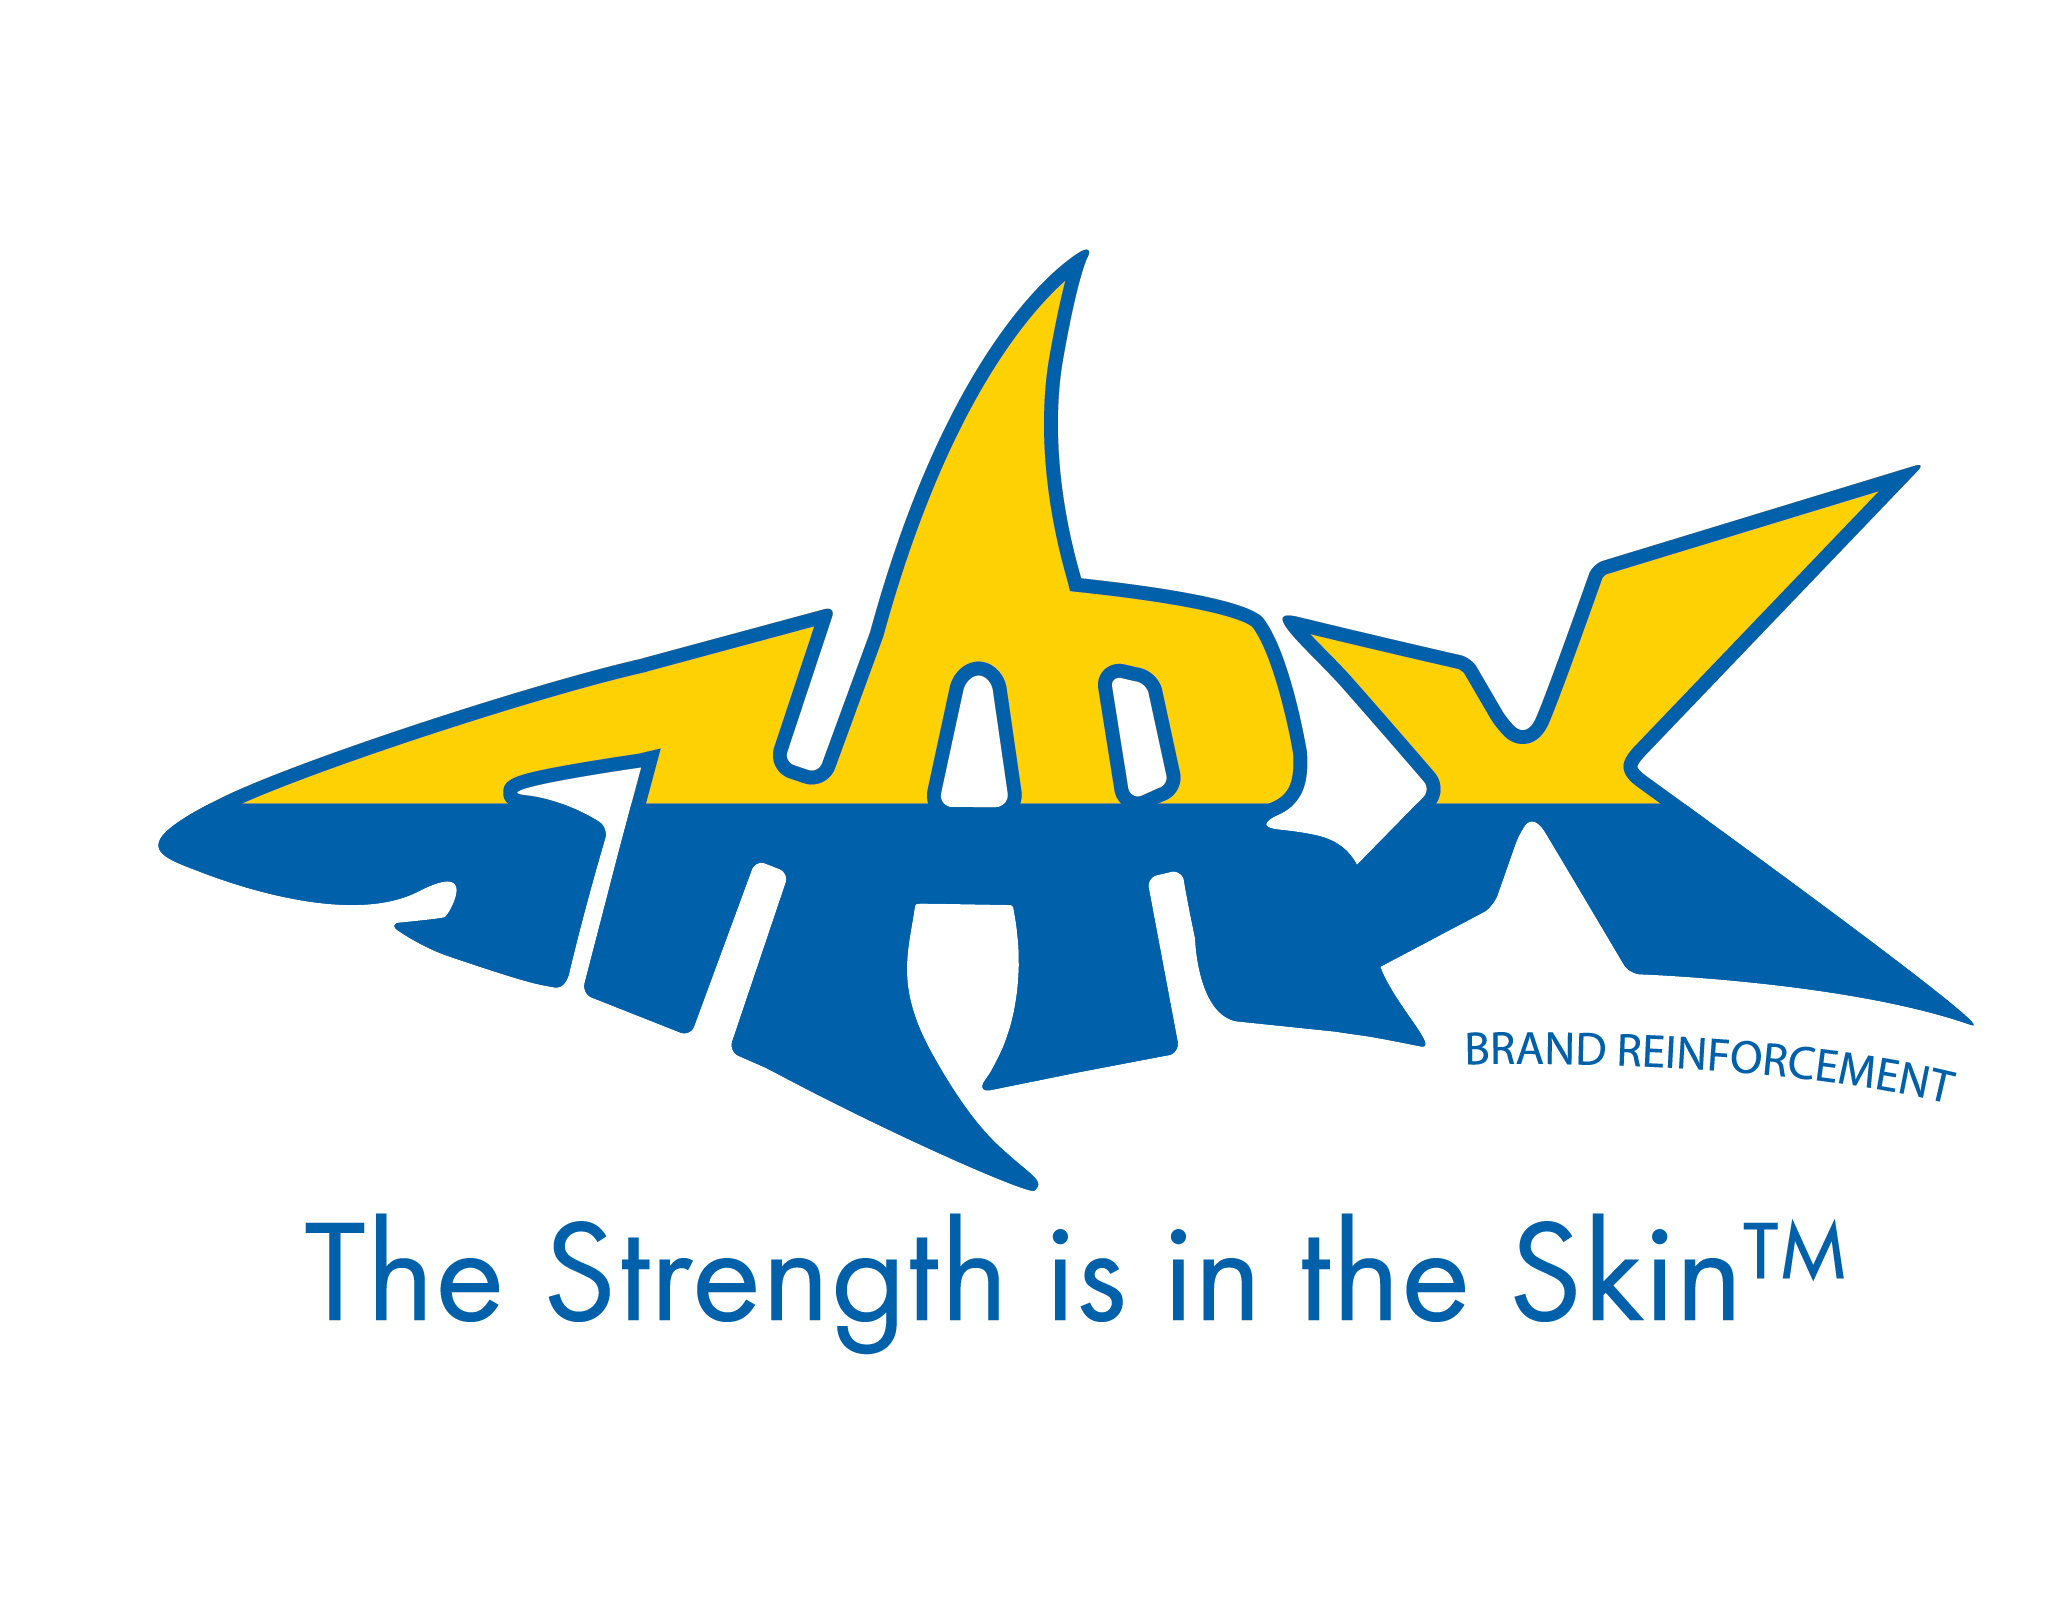 Sharx™ The Strength is in the Skin.™